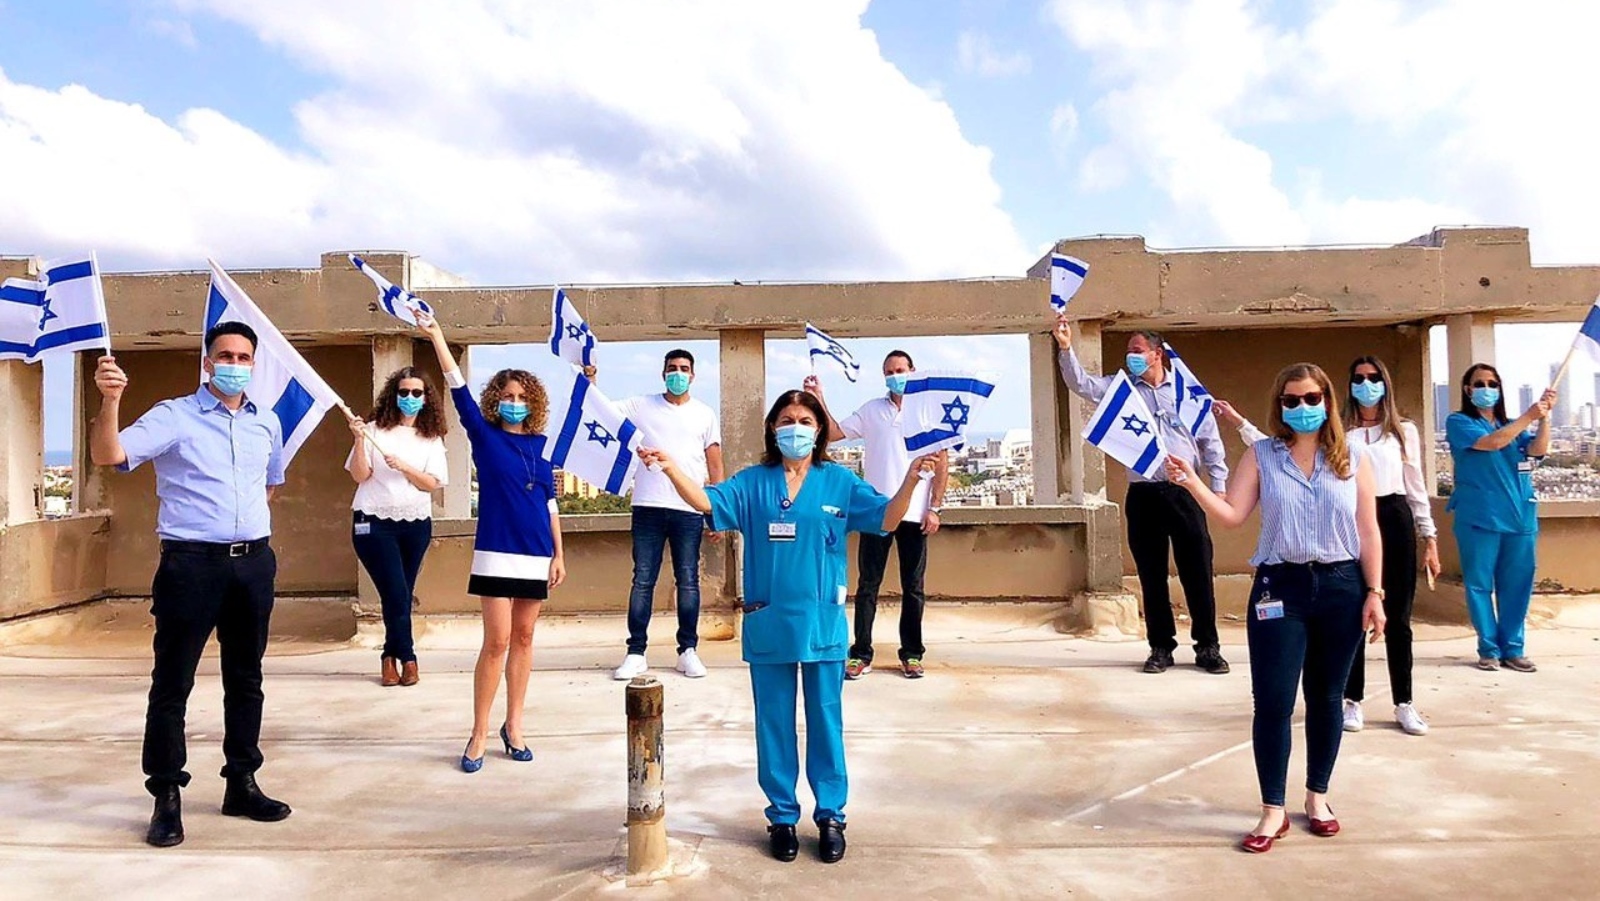 Israeli hospital employees on Israel Independence Day, April 29. Photo courtesy of the Ministry of Foreign Affairs